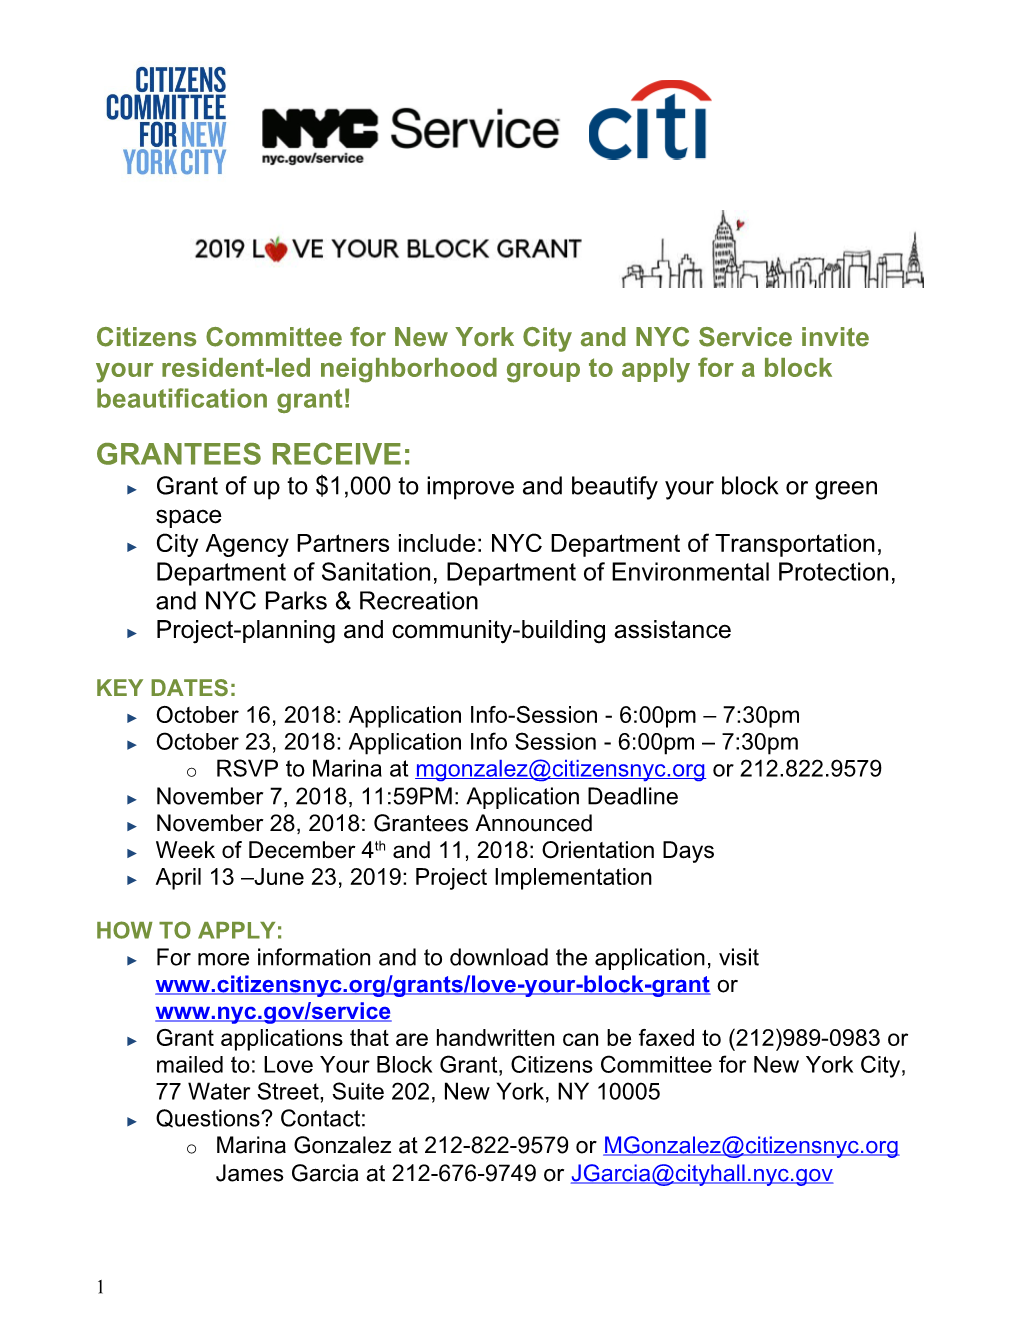 Citizens Committee for New York City and NYC Service Invite Your Resident-Led Neighborhood